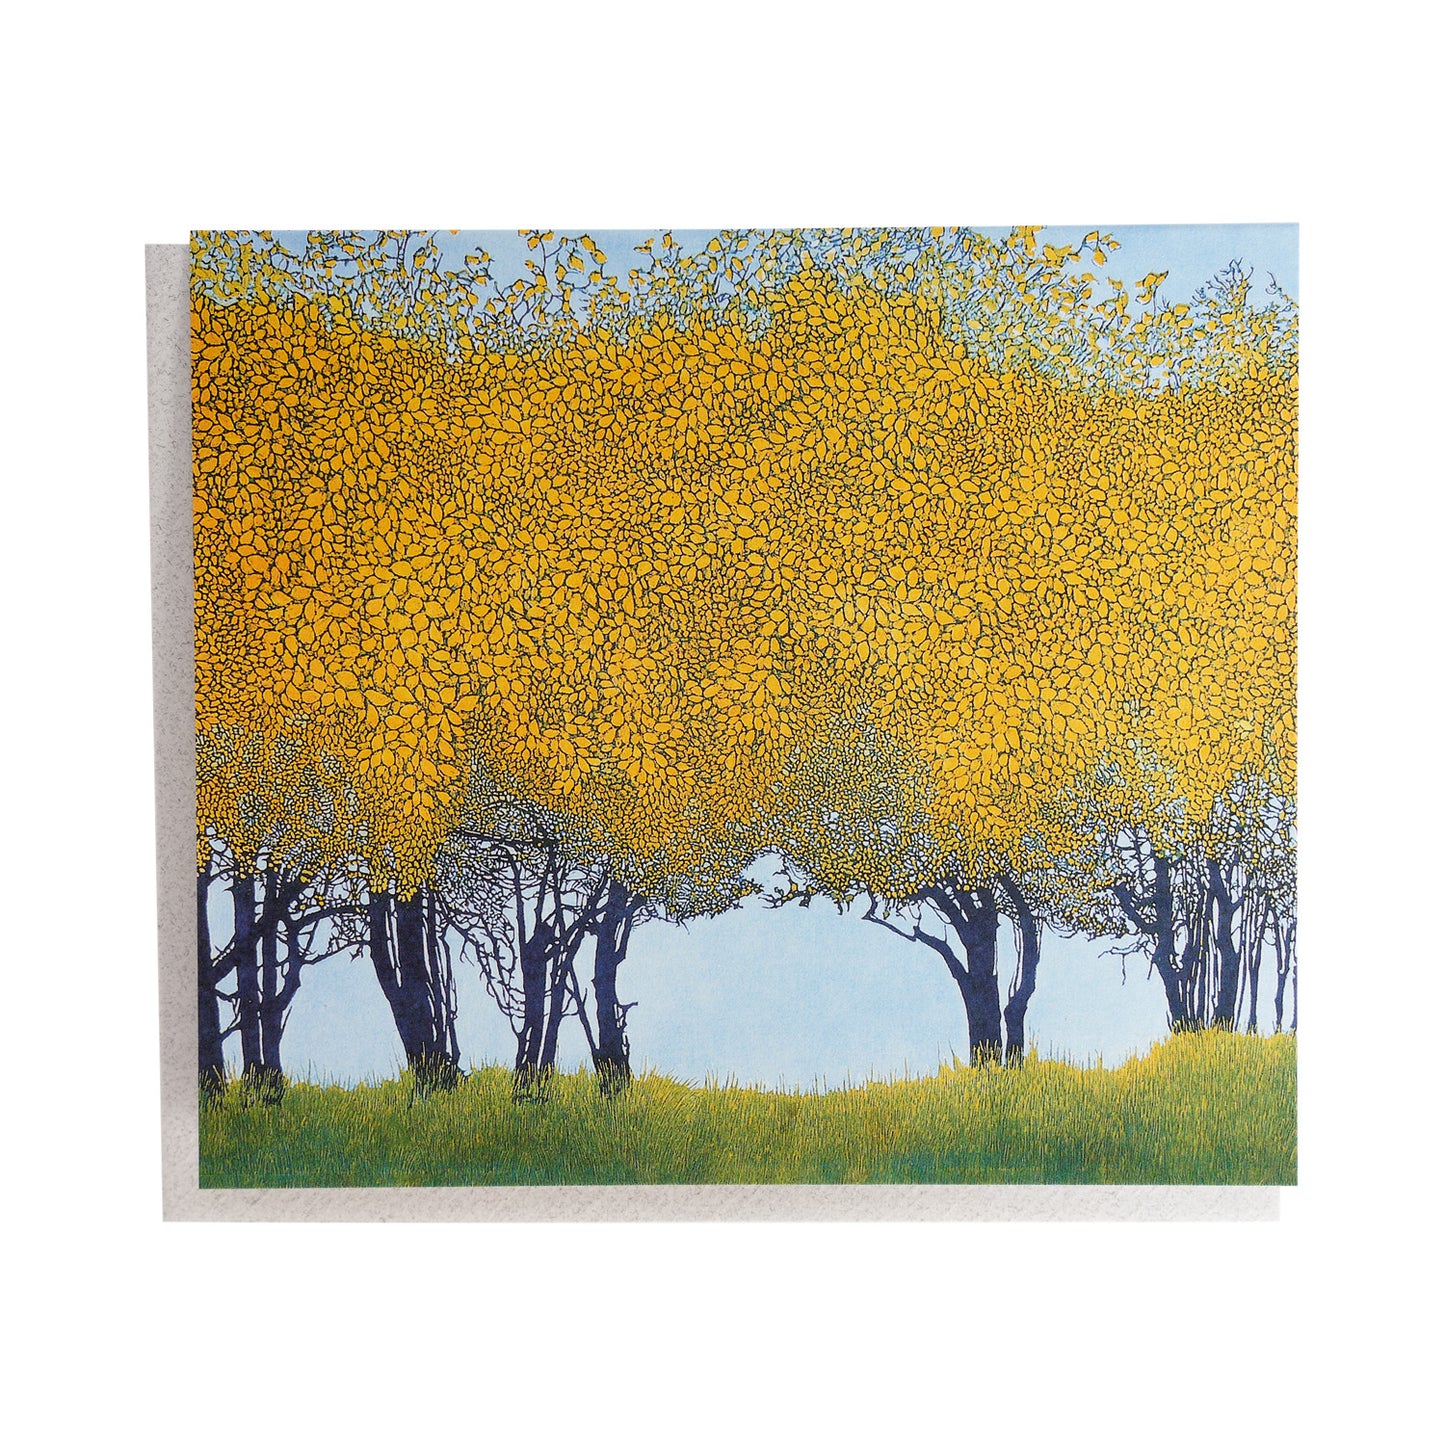 Dancing Trees by Phil Greenwood - Greeting Card